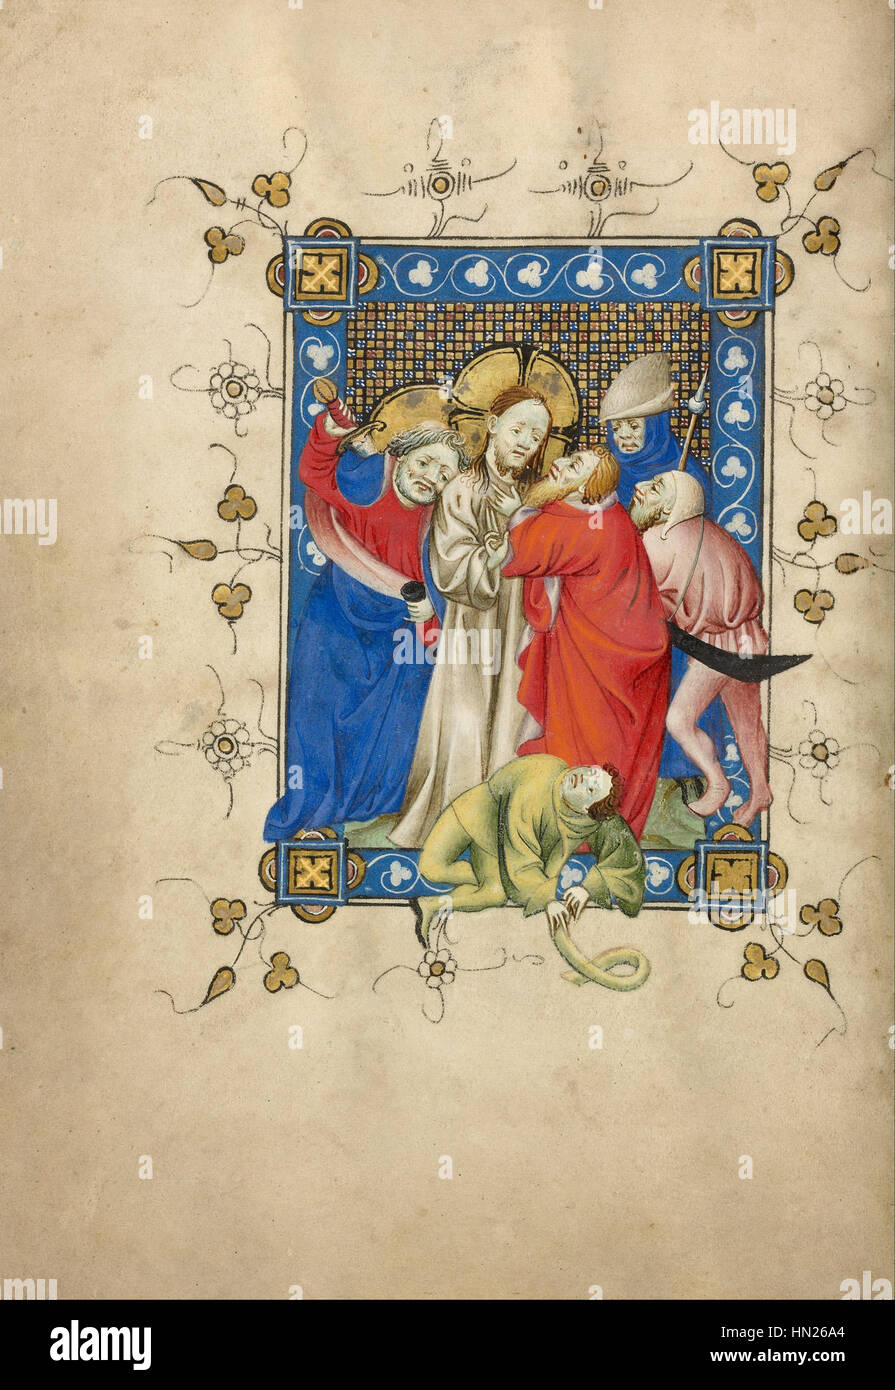 Masters of Dirc van Delf (Dutch, active about 1400 - about 1410) - The Betrayal of Christ - Google Art Project Stock Photo